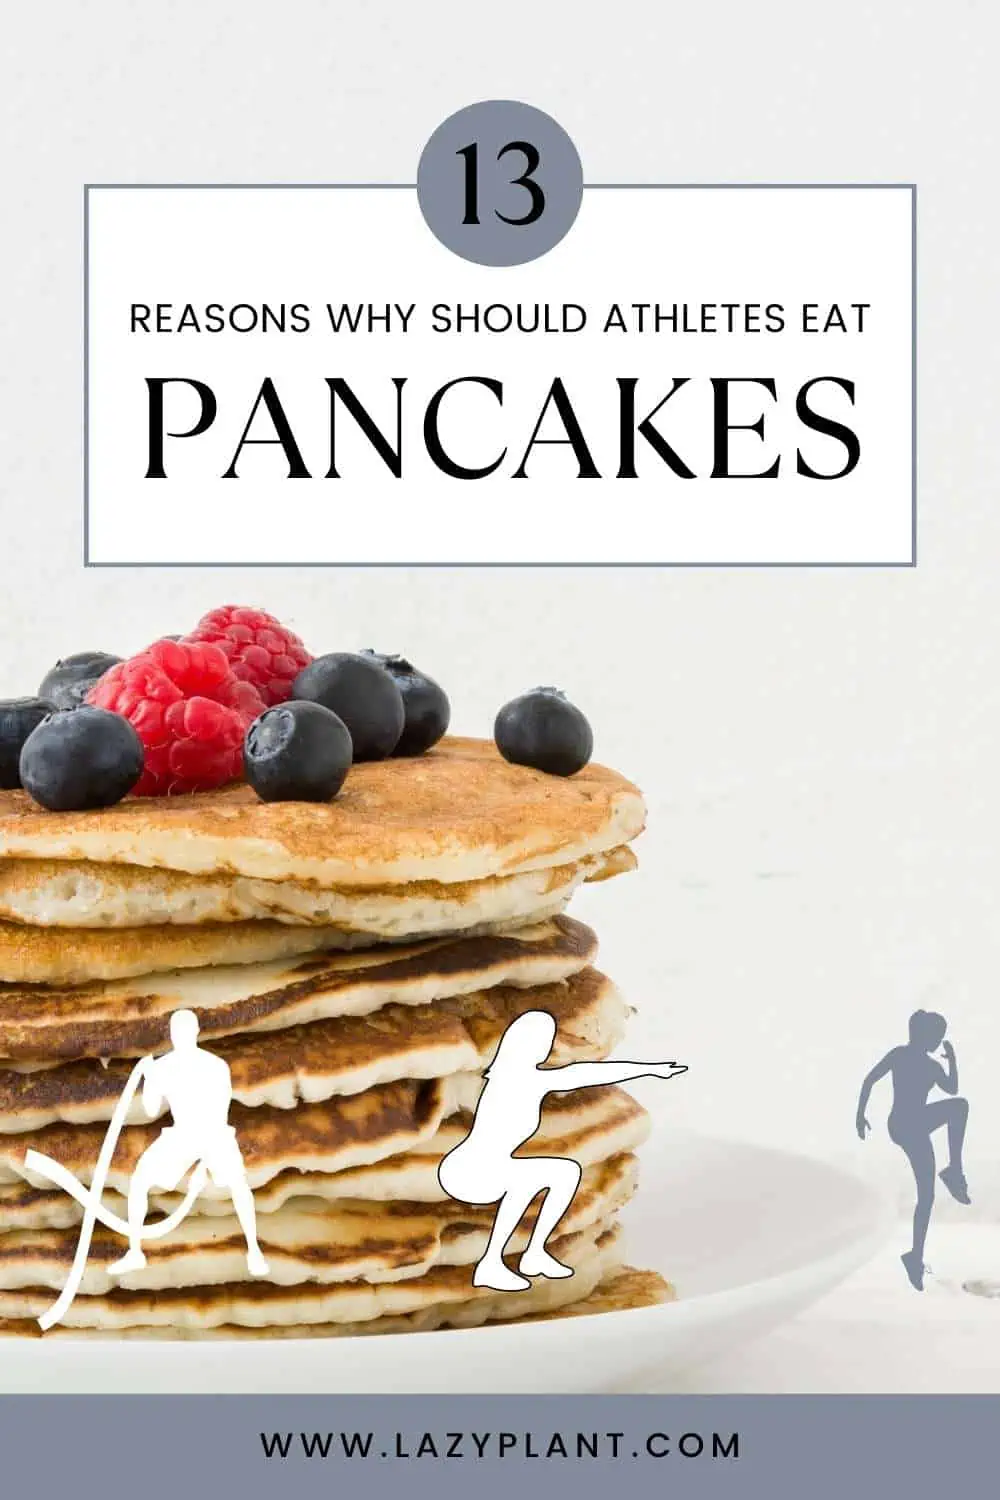 pancakes are the ultimate post-workout fast food snack.